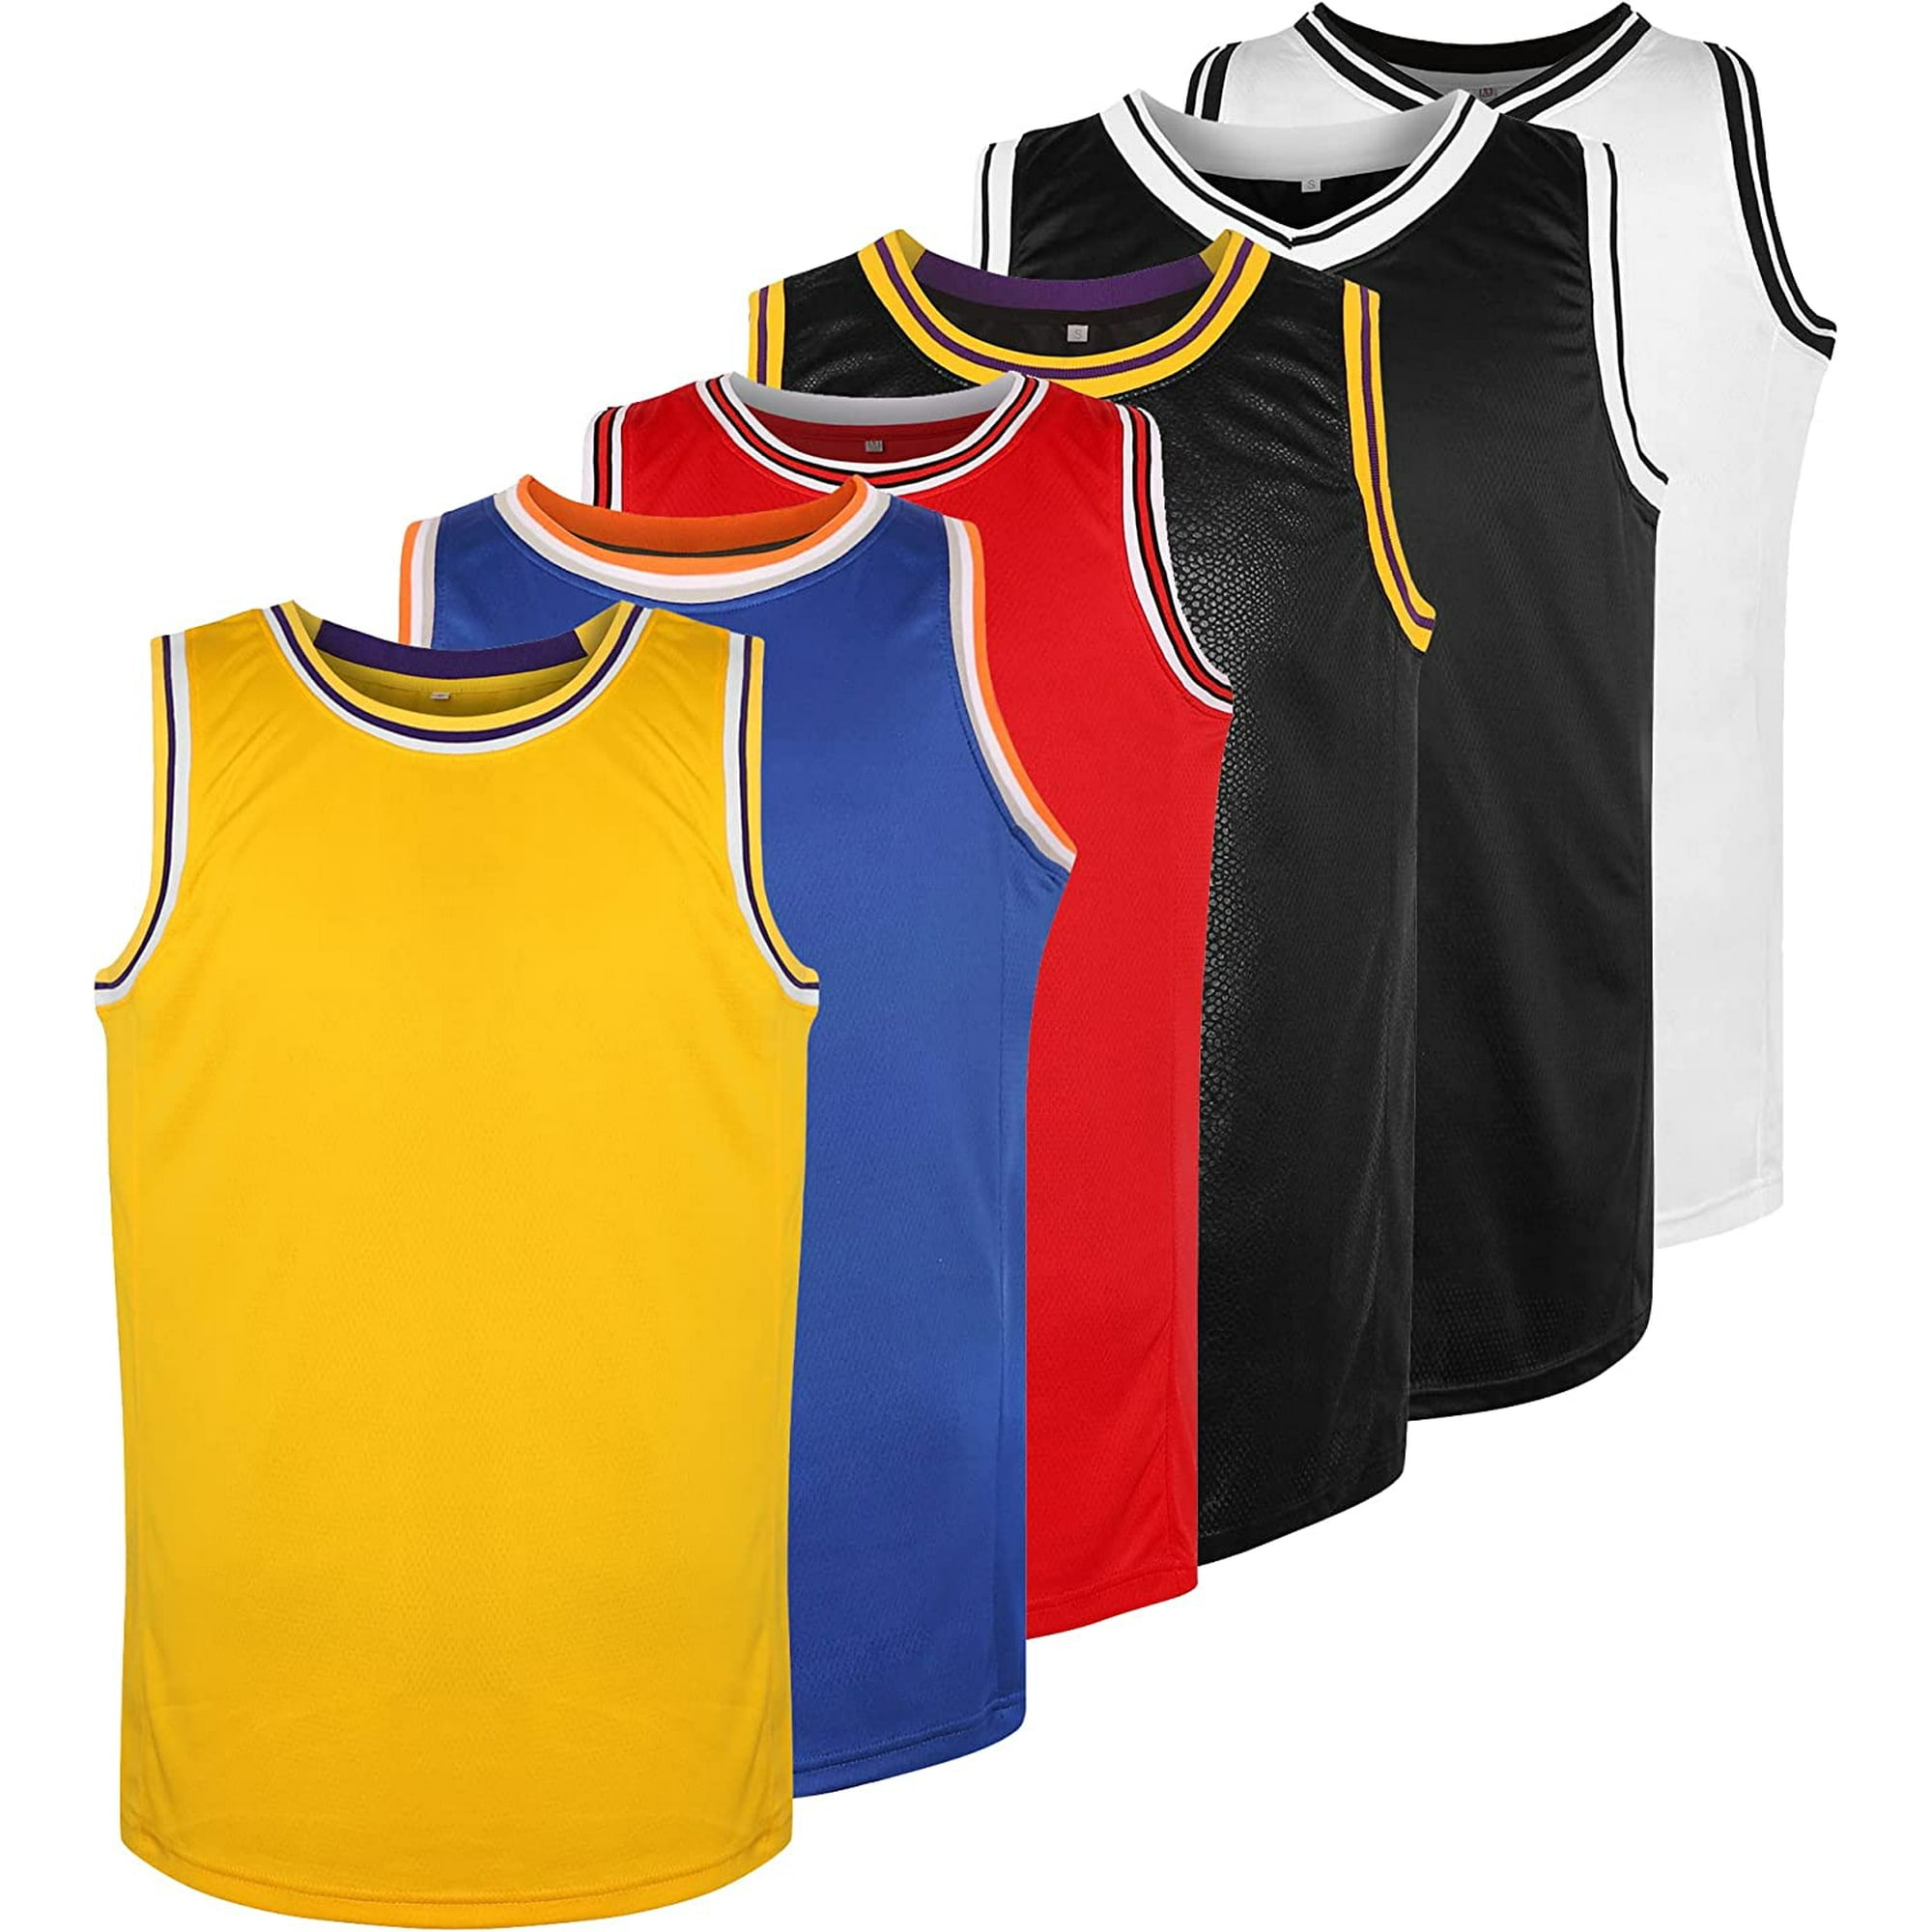 MESOSPERO Blank Basketball Jersey 90S Hip Hop Clothing for Party,Mens Plain  Mesh Athletic Practice Sports Shirts S-3XL 